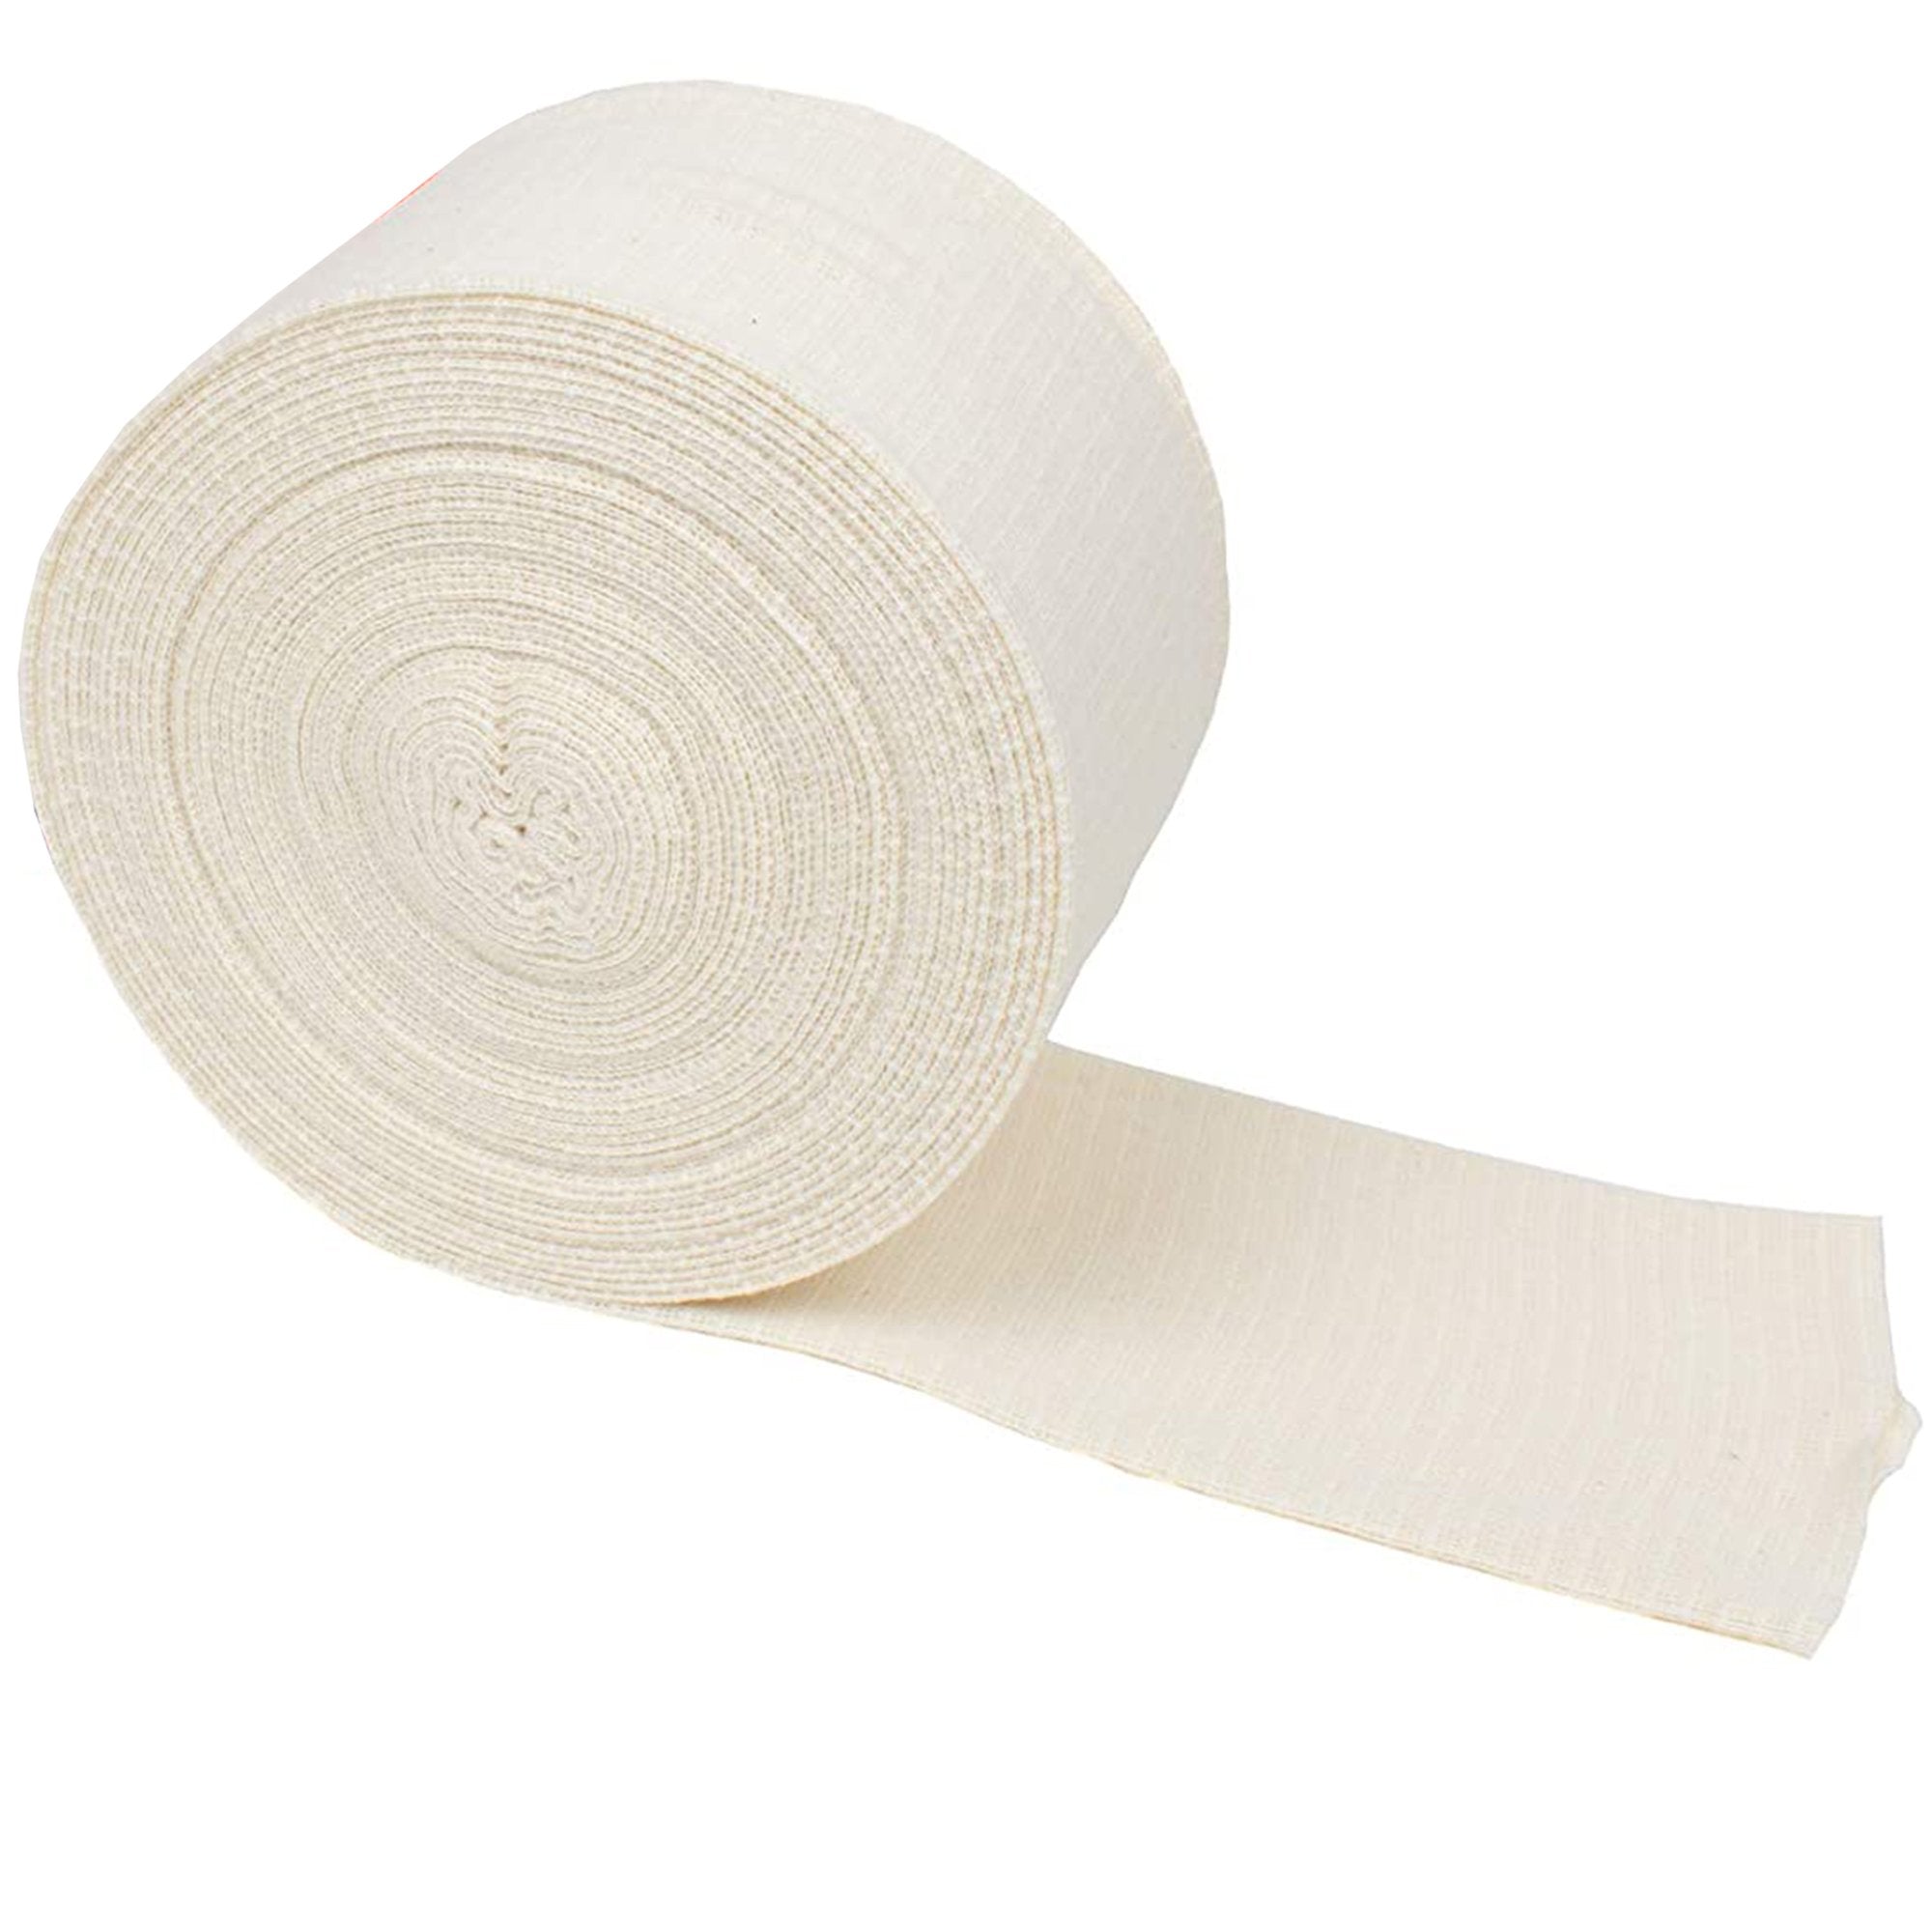 Elastic Tubular Support Bandage Comperm® 5 Inch X 11 Yard Pull On Natural NonSterile Size G Standard Compression